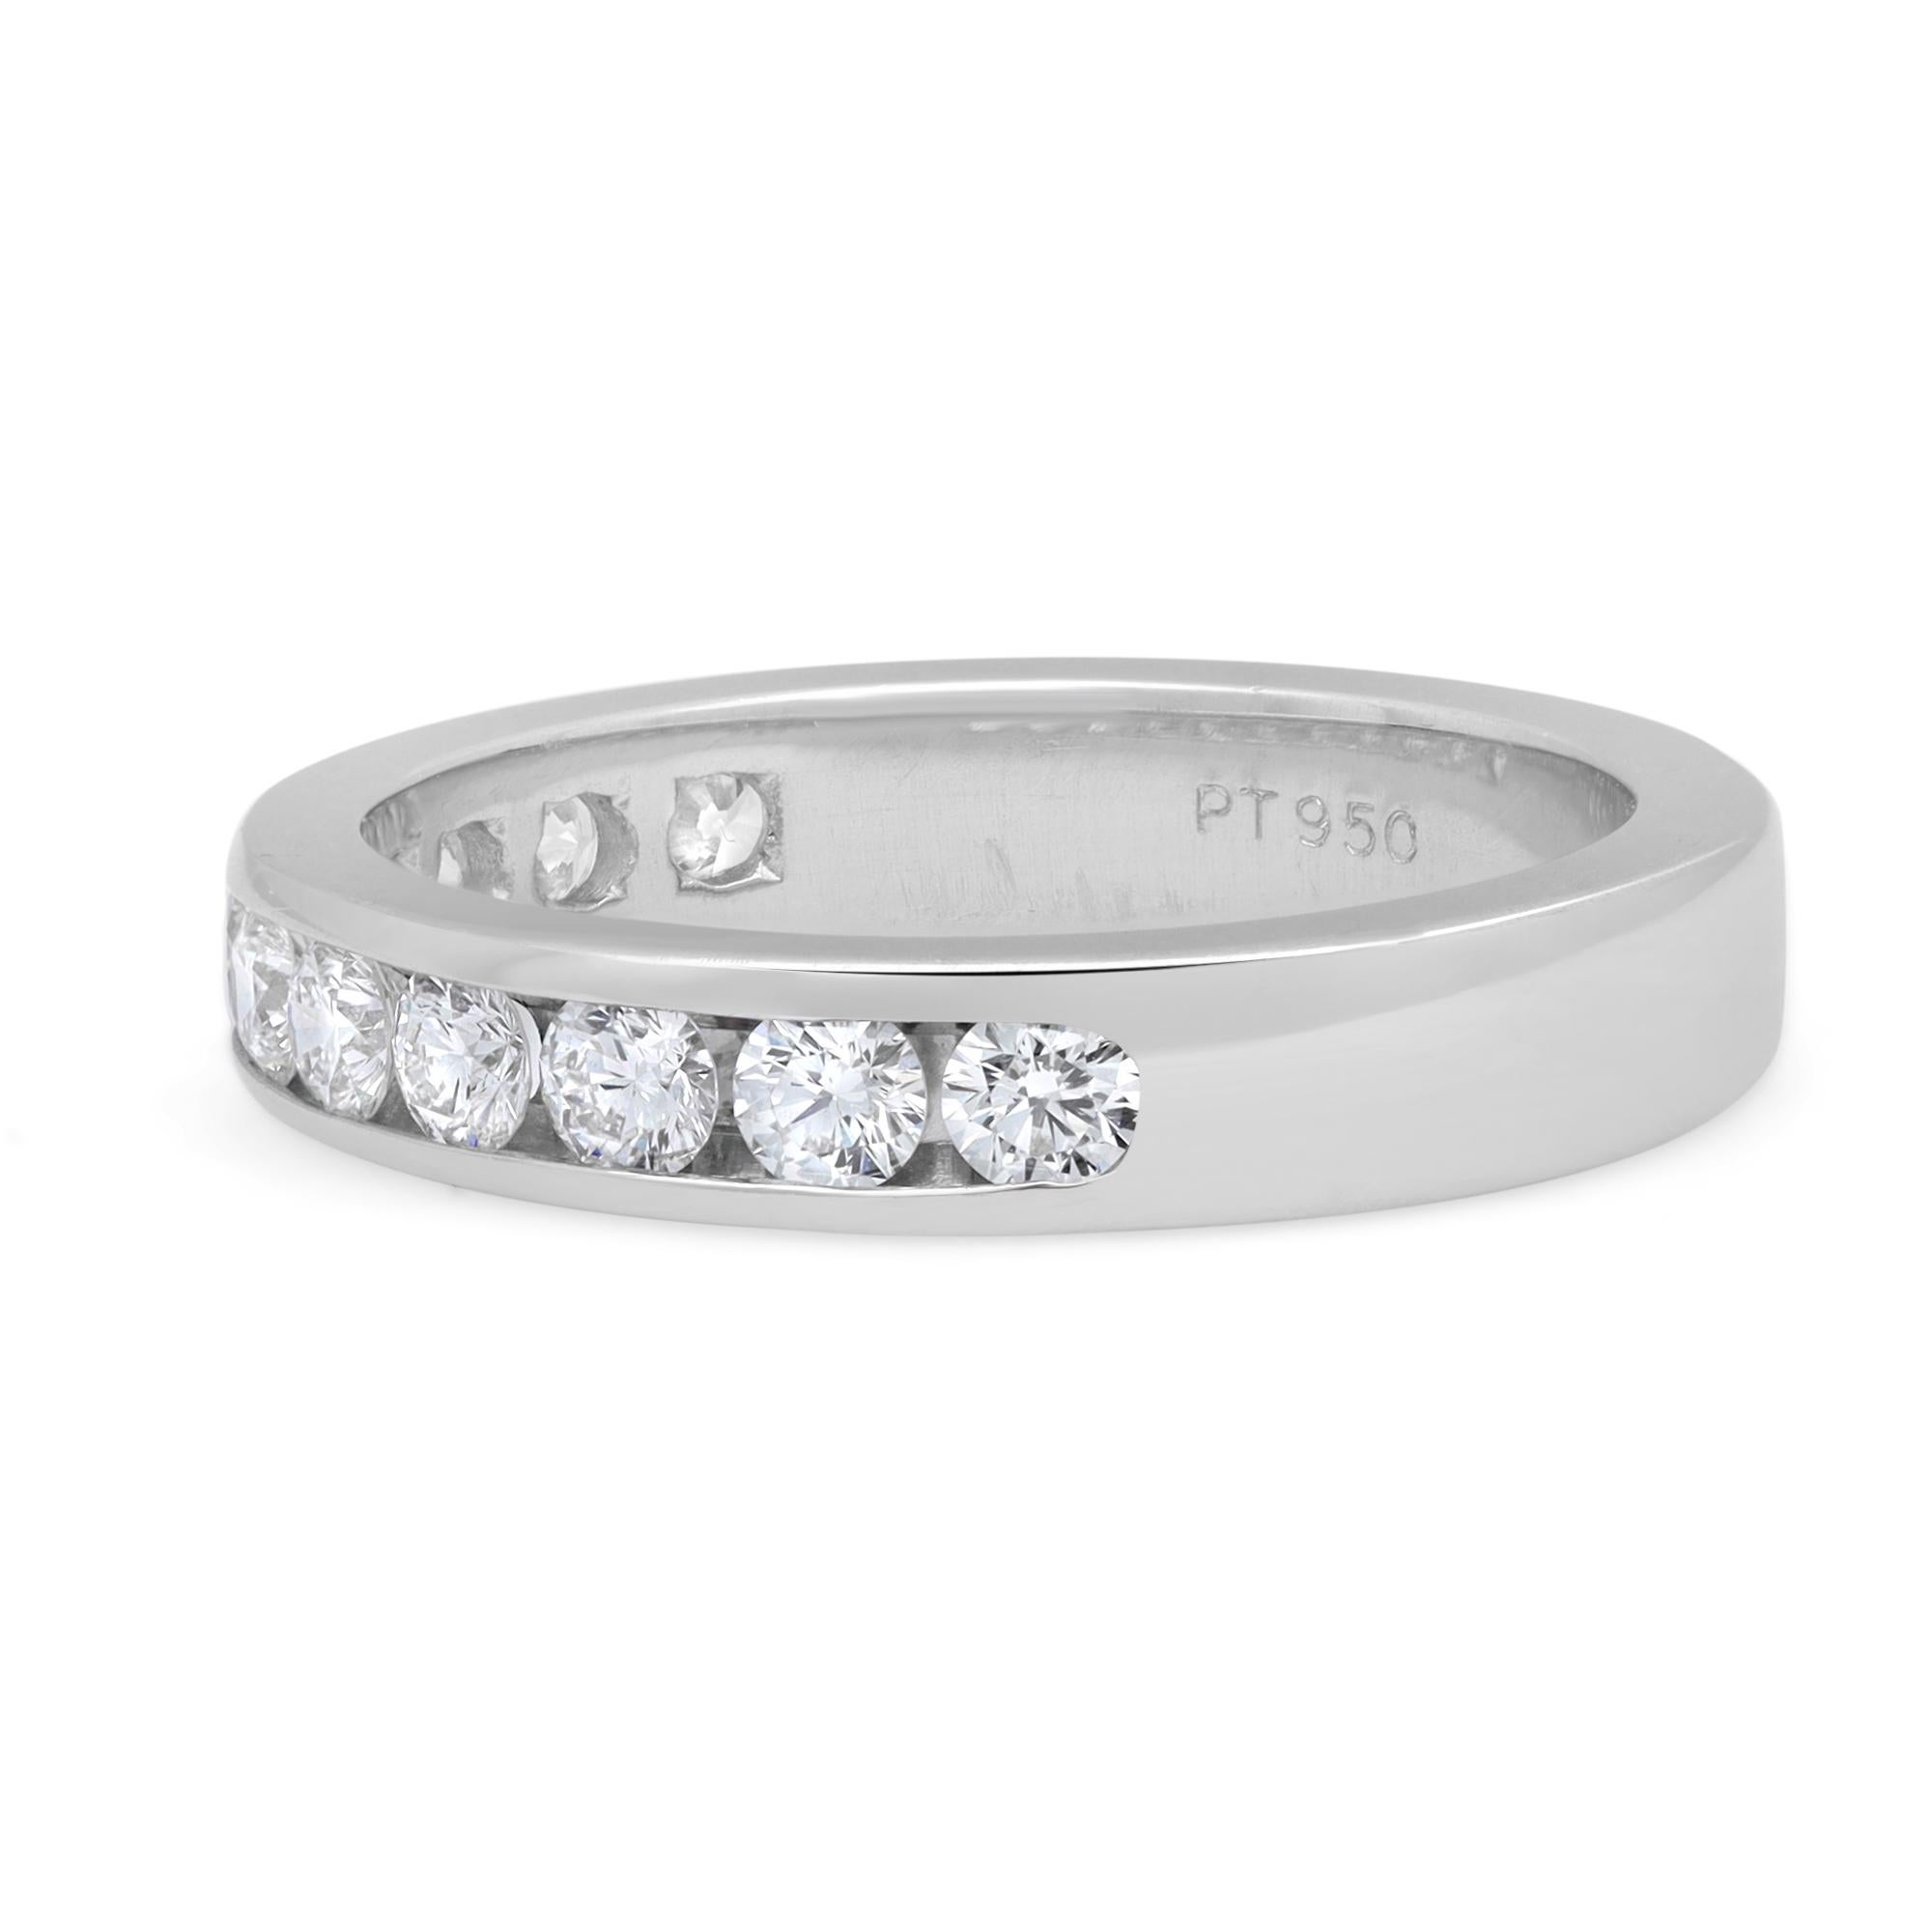 This classic women's eternity band ring features 11 bright white round brilliant cut dazzling diamonds. All diamonds are channel set in a solid platinum setting. Total diamond weight: 0.79 carat. Diamond color G-H and SI2 clarity. Ring Size 6.75.